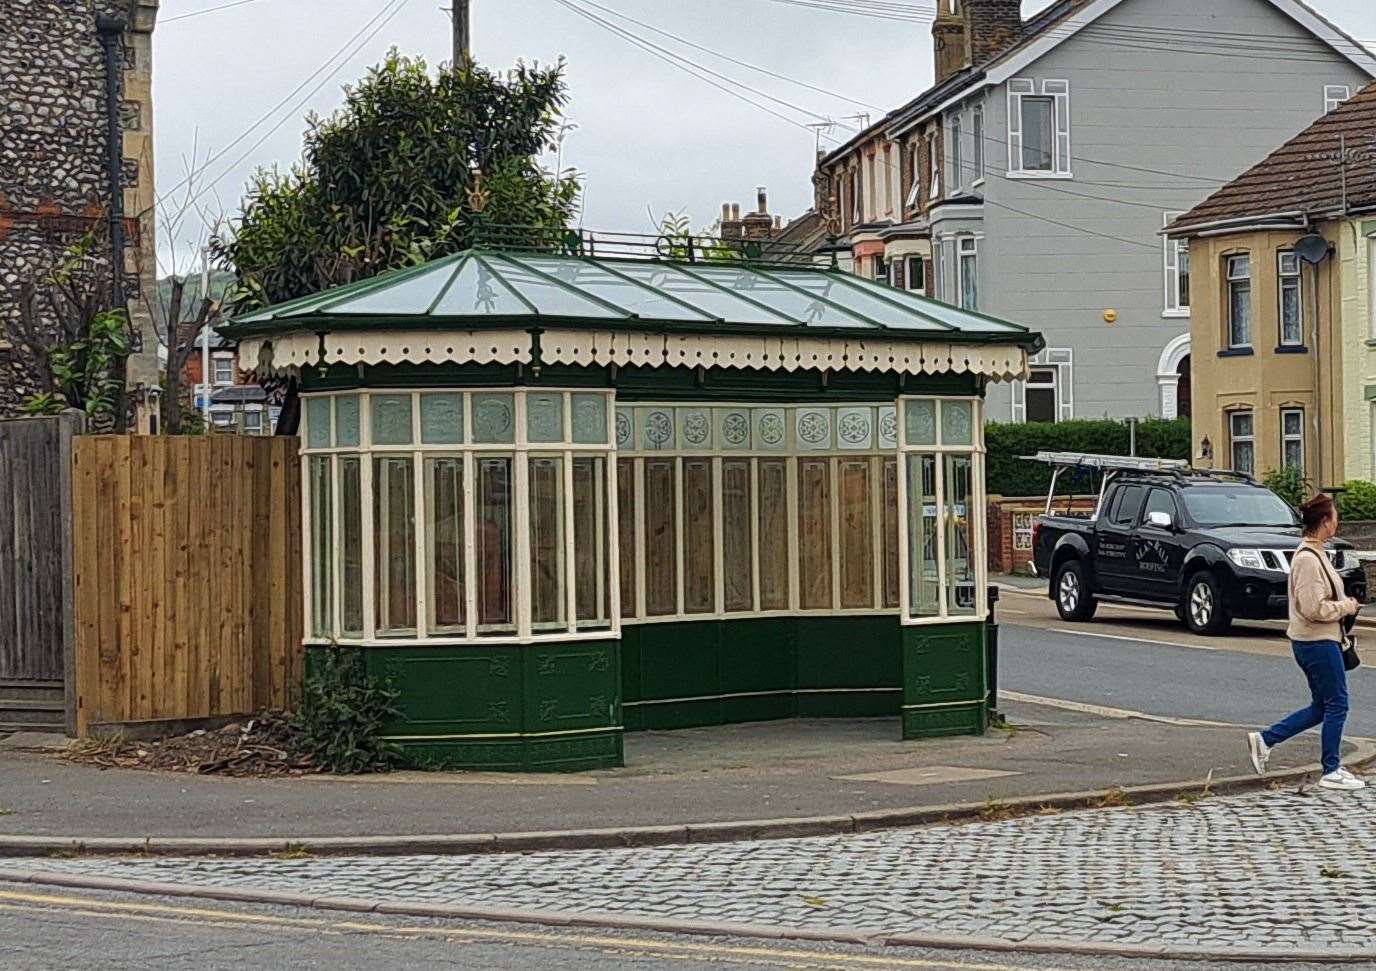 A local landmark, the old tram shelter at the corner of Folkestone Road and Elms Vale Road Dover